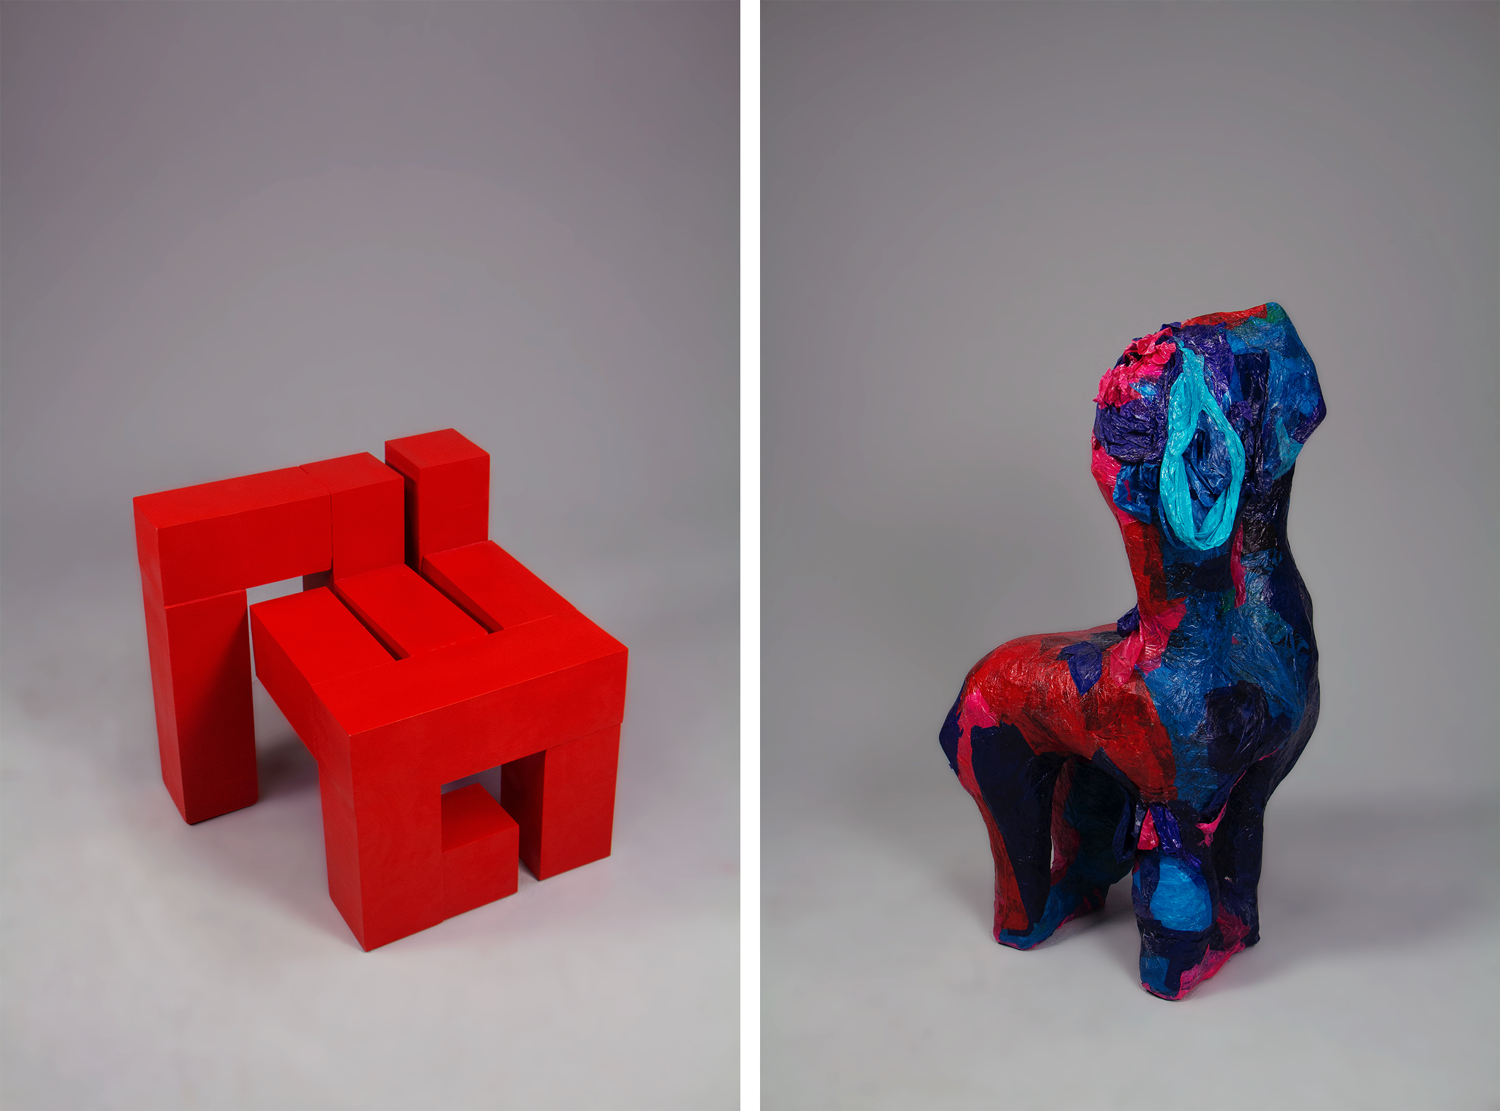 Two pieces by Lydia: Left, and abstract red stool; right: a sculpture of a lamb